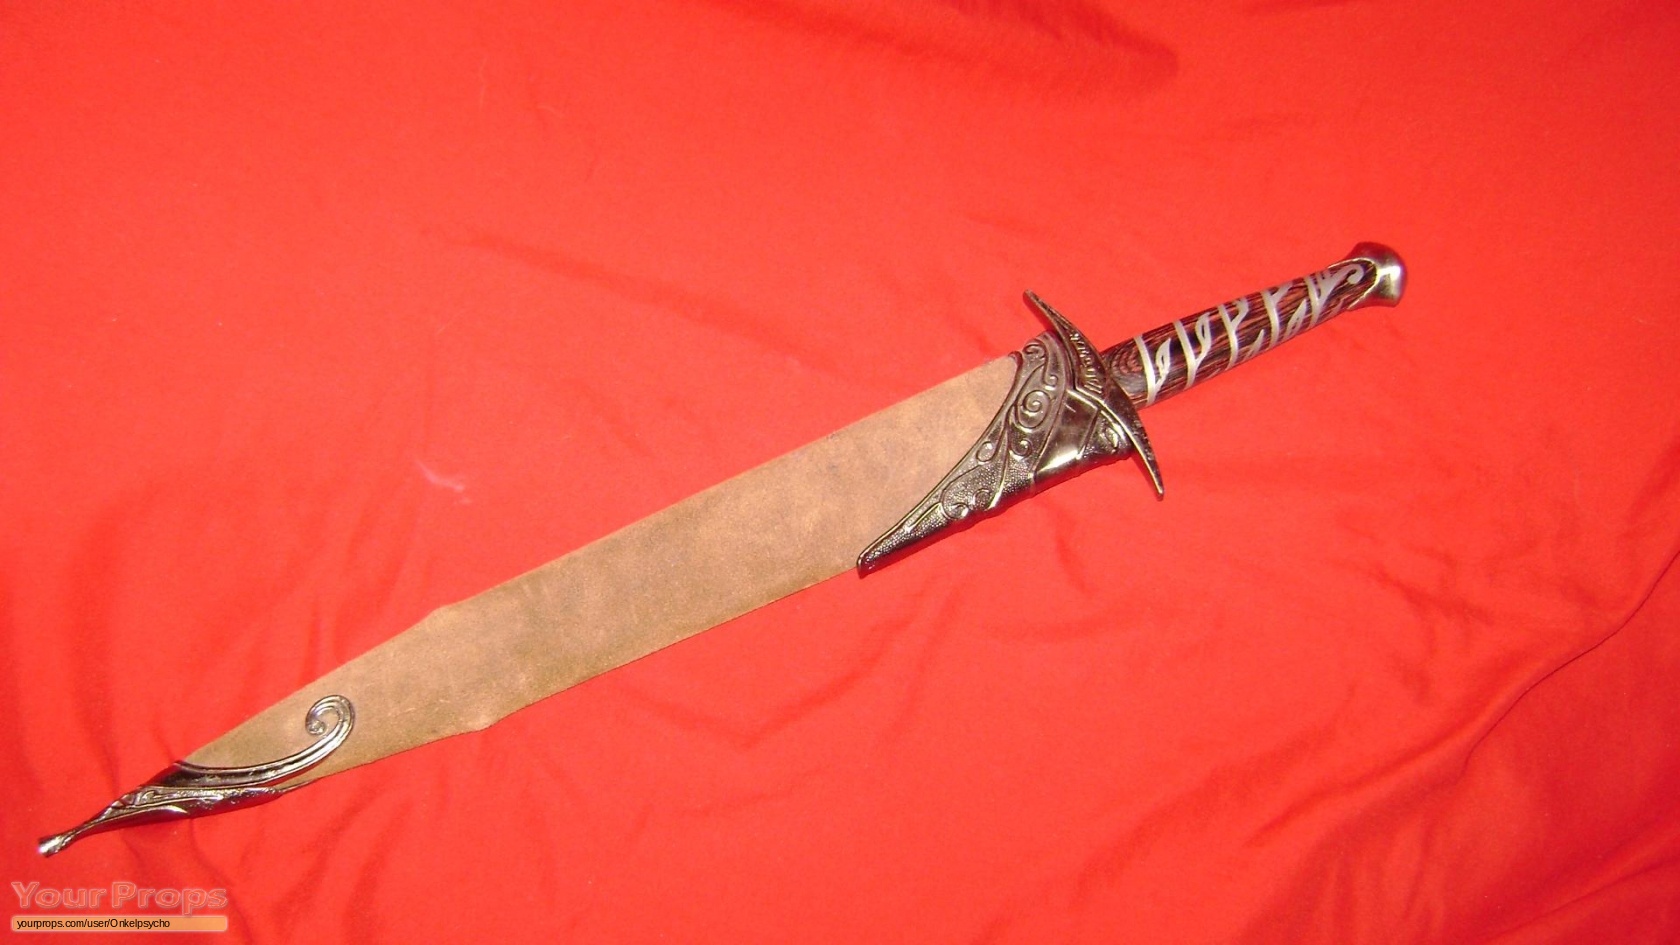 Lord of the Rings Trilogy Sting replica prop weapon